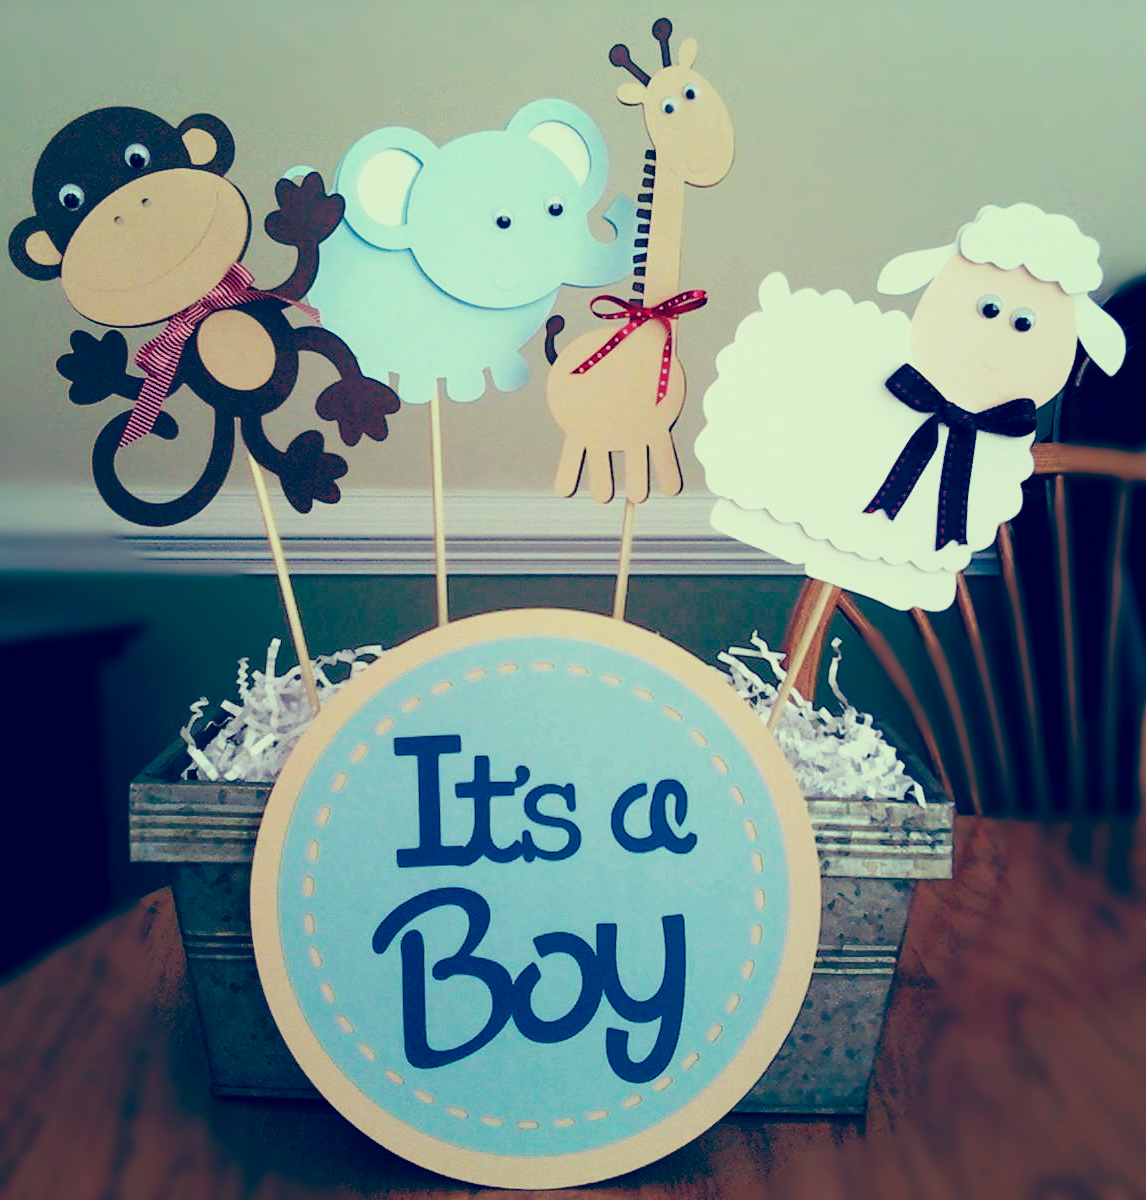 It's A Boy! – Baby Shower Invitation Wording | all.urz party planning